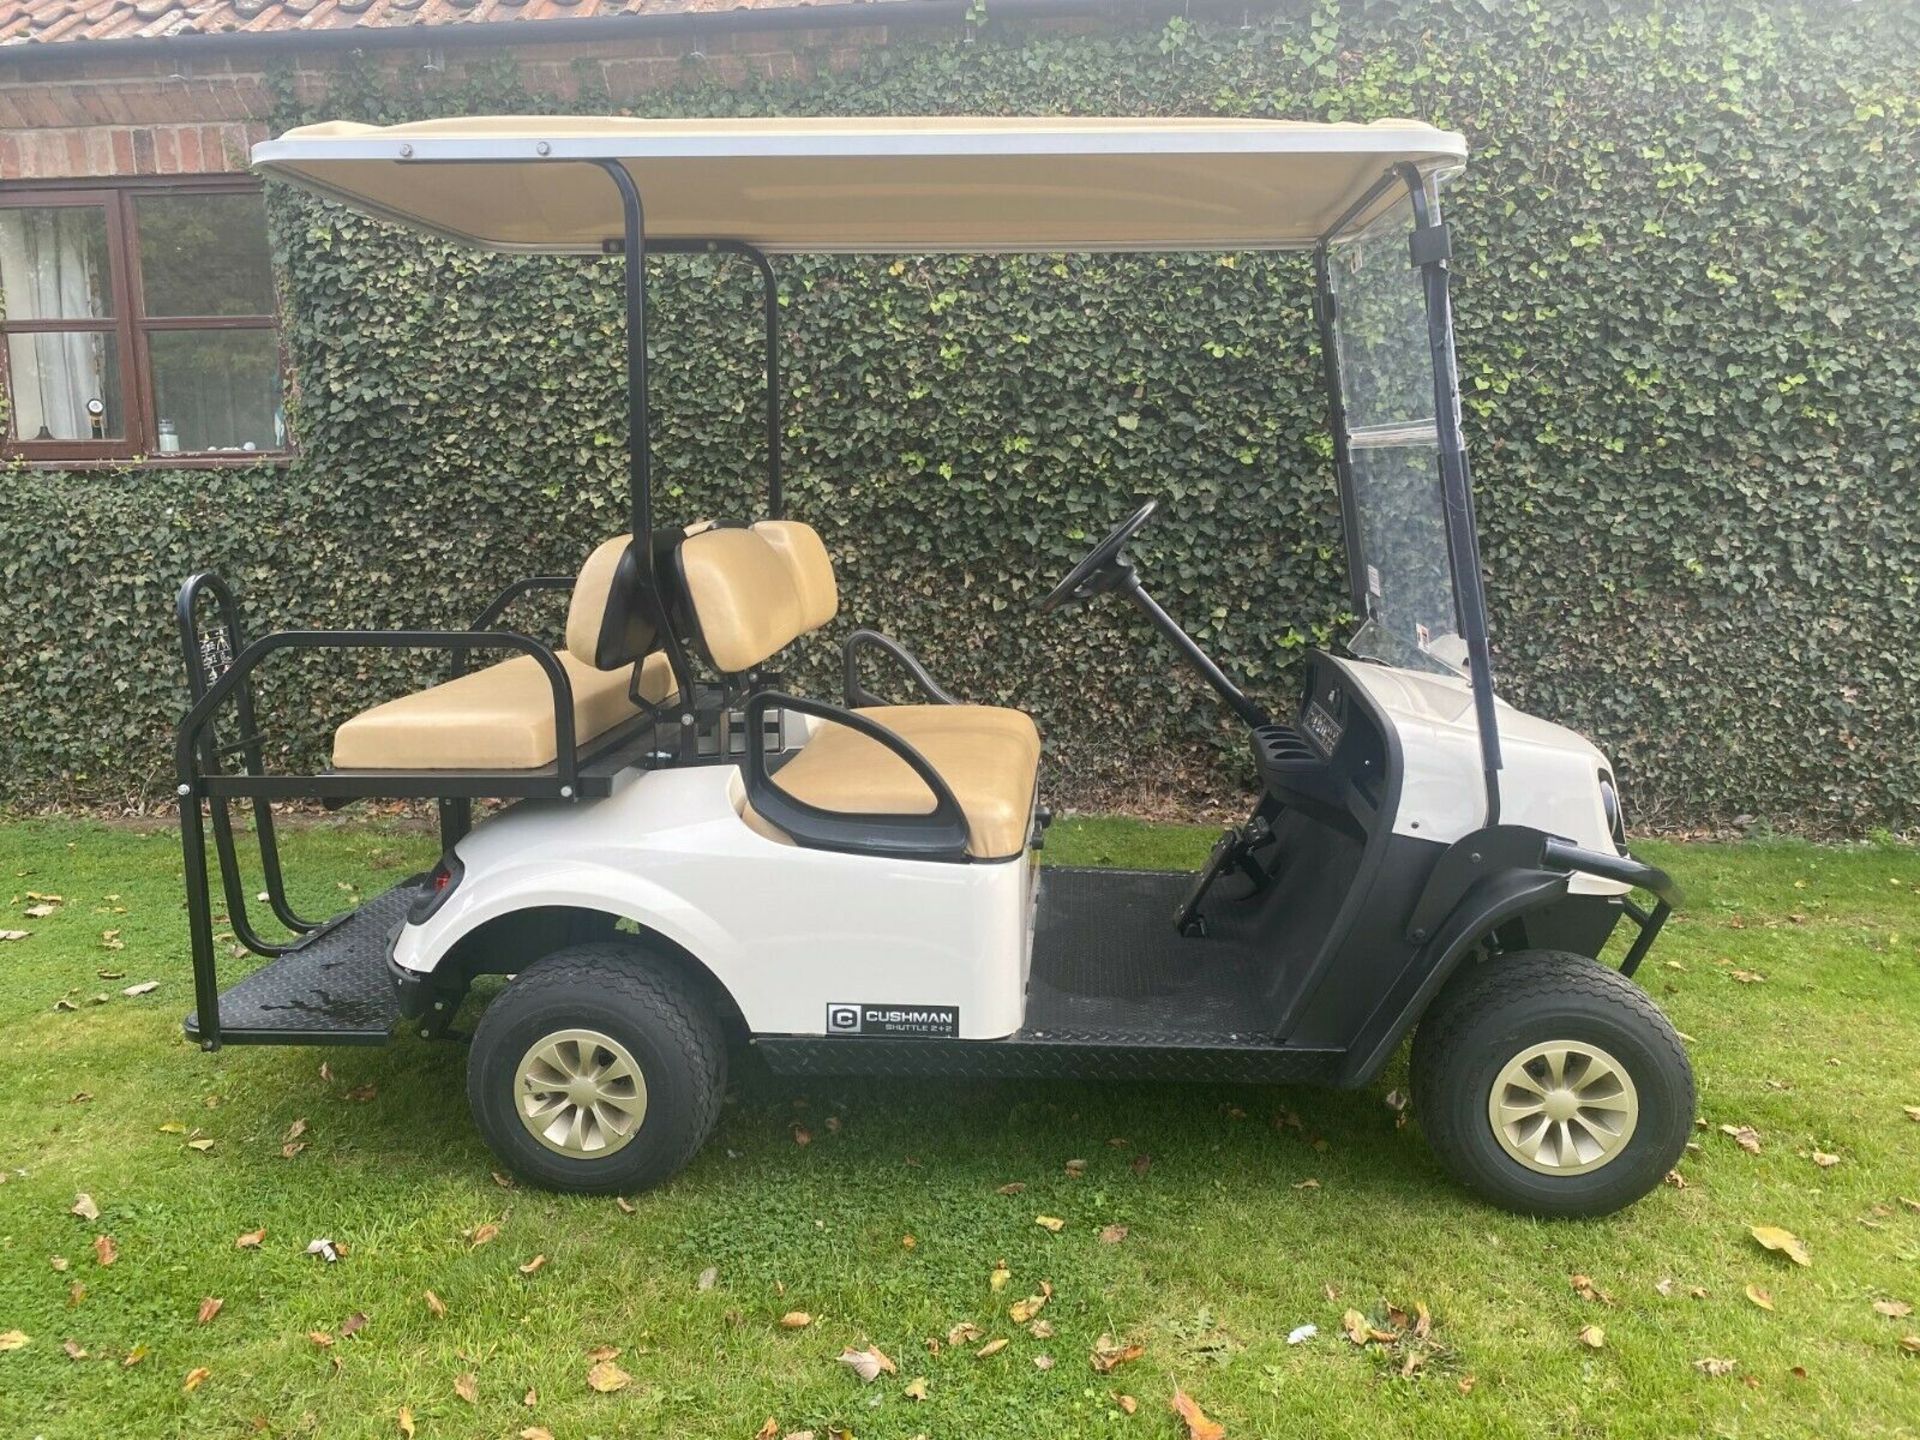 GOLF BUGGY CUSHMAN SHUTTLE 2 + 2, PETROL, 4 SEATER, ONLY 54 HOURS FROM NEW, PUCHASED NEW JUNE 2018 - Bild 2 aus 11